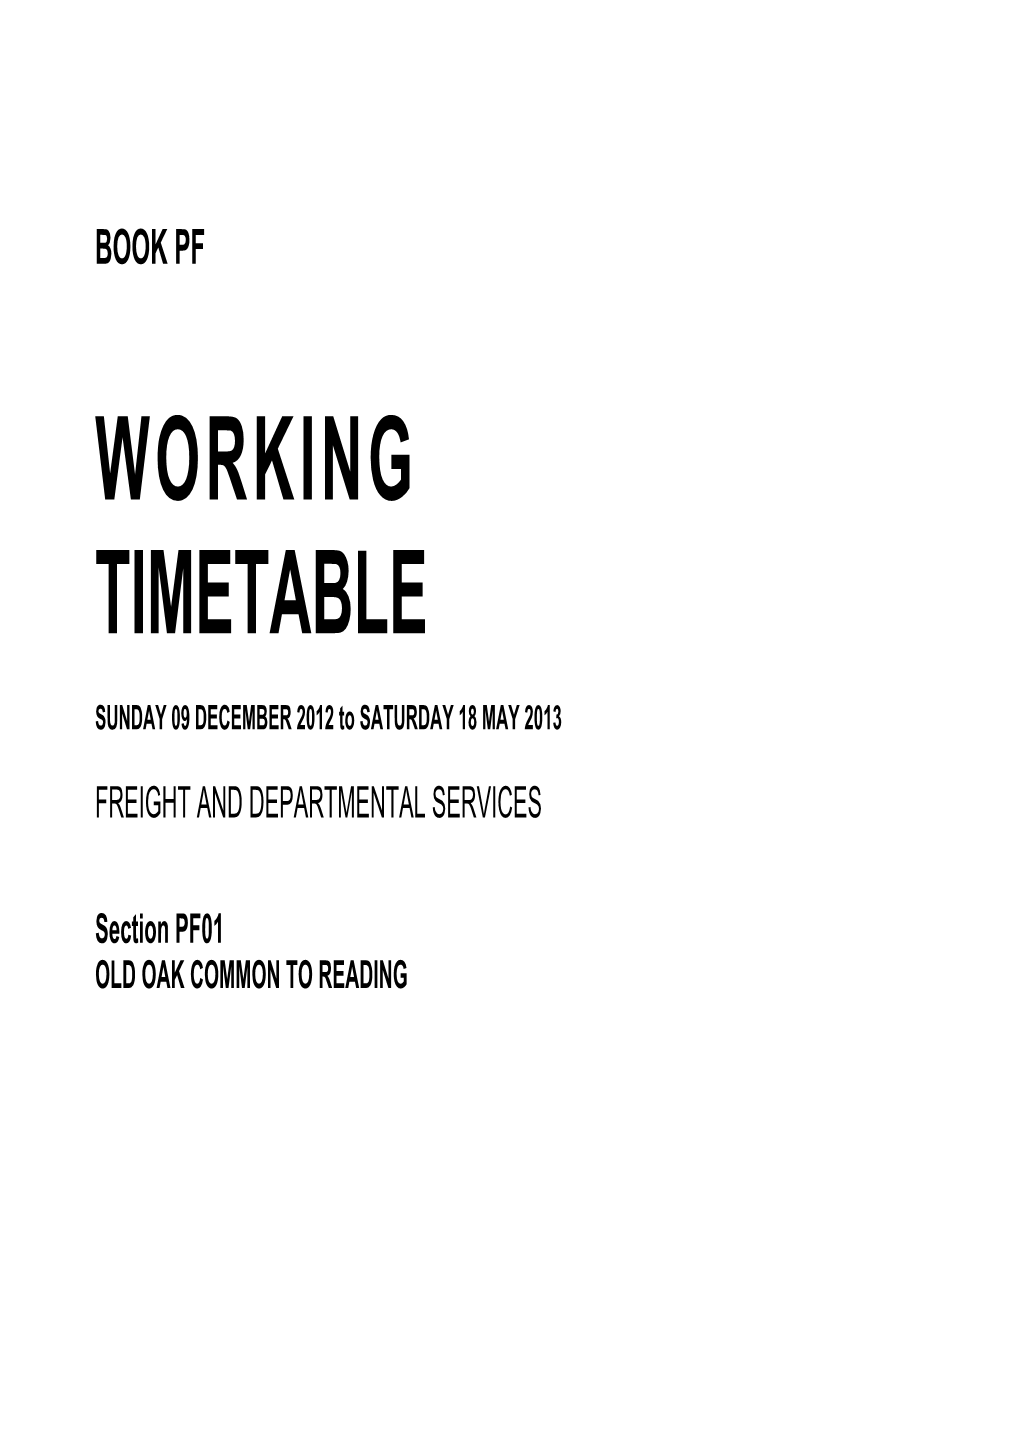 Working Timetable